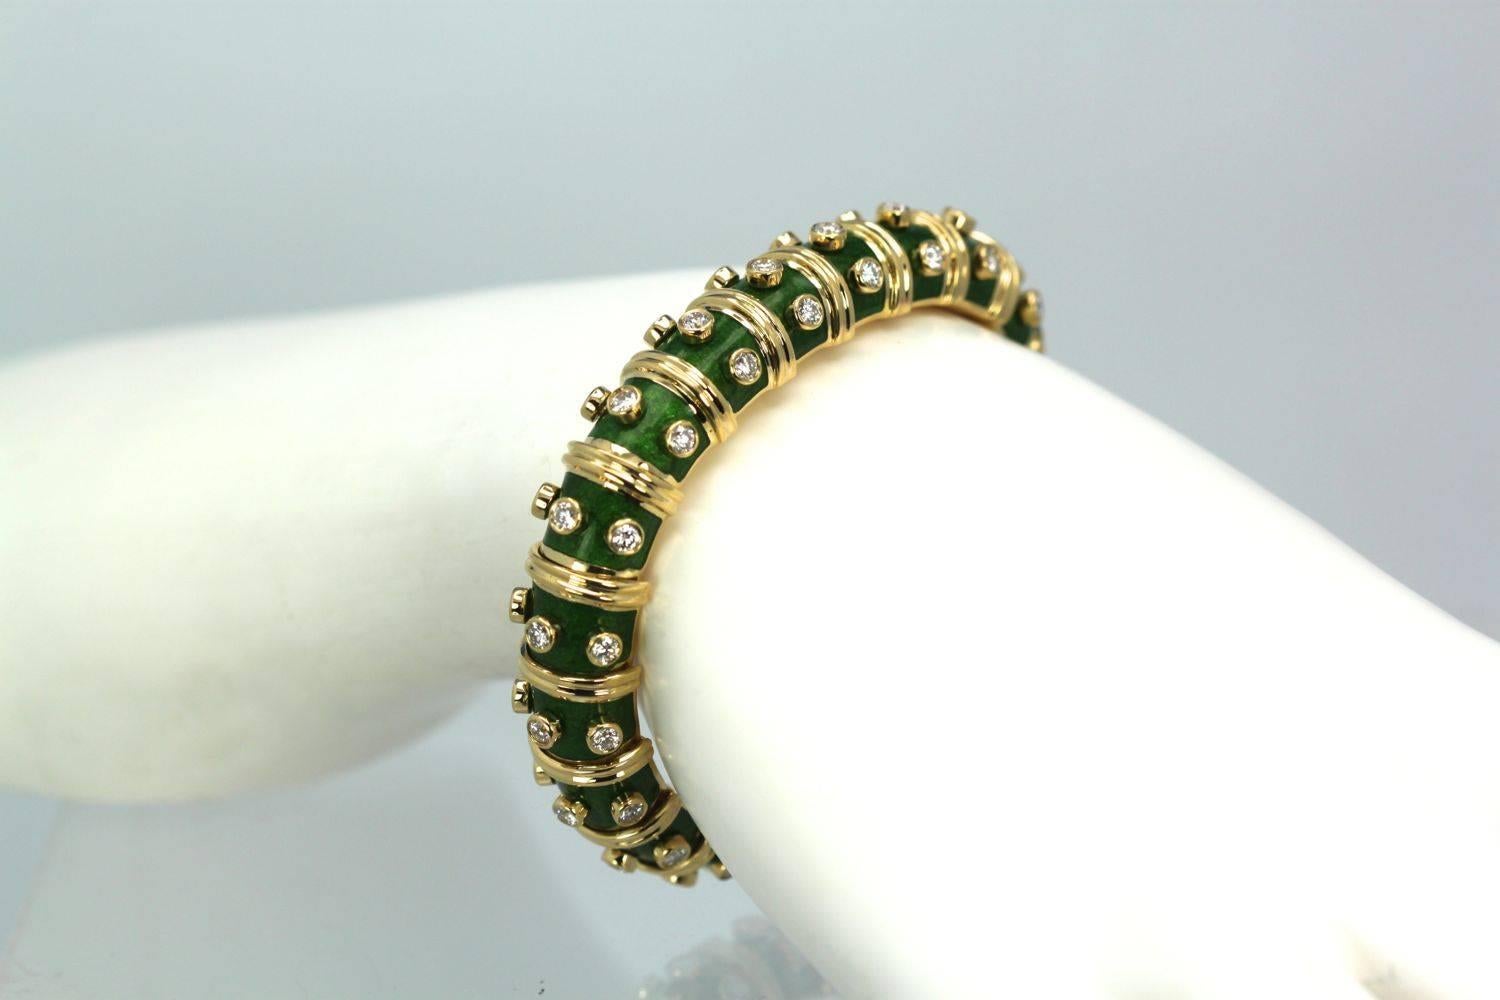 This Schulmberger bracelet is an iconic dream.  Done in gorgeous green enamel with 60 DEF and VS Diamonds to total 3.00 carats with a secure clasp.  This bracelet is used but in excellent condition.  There is no enamel loss the segments are in